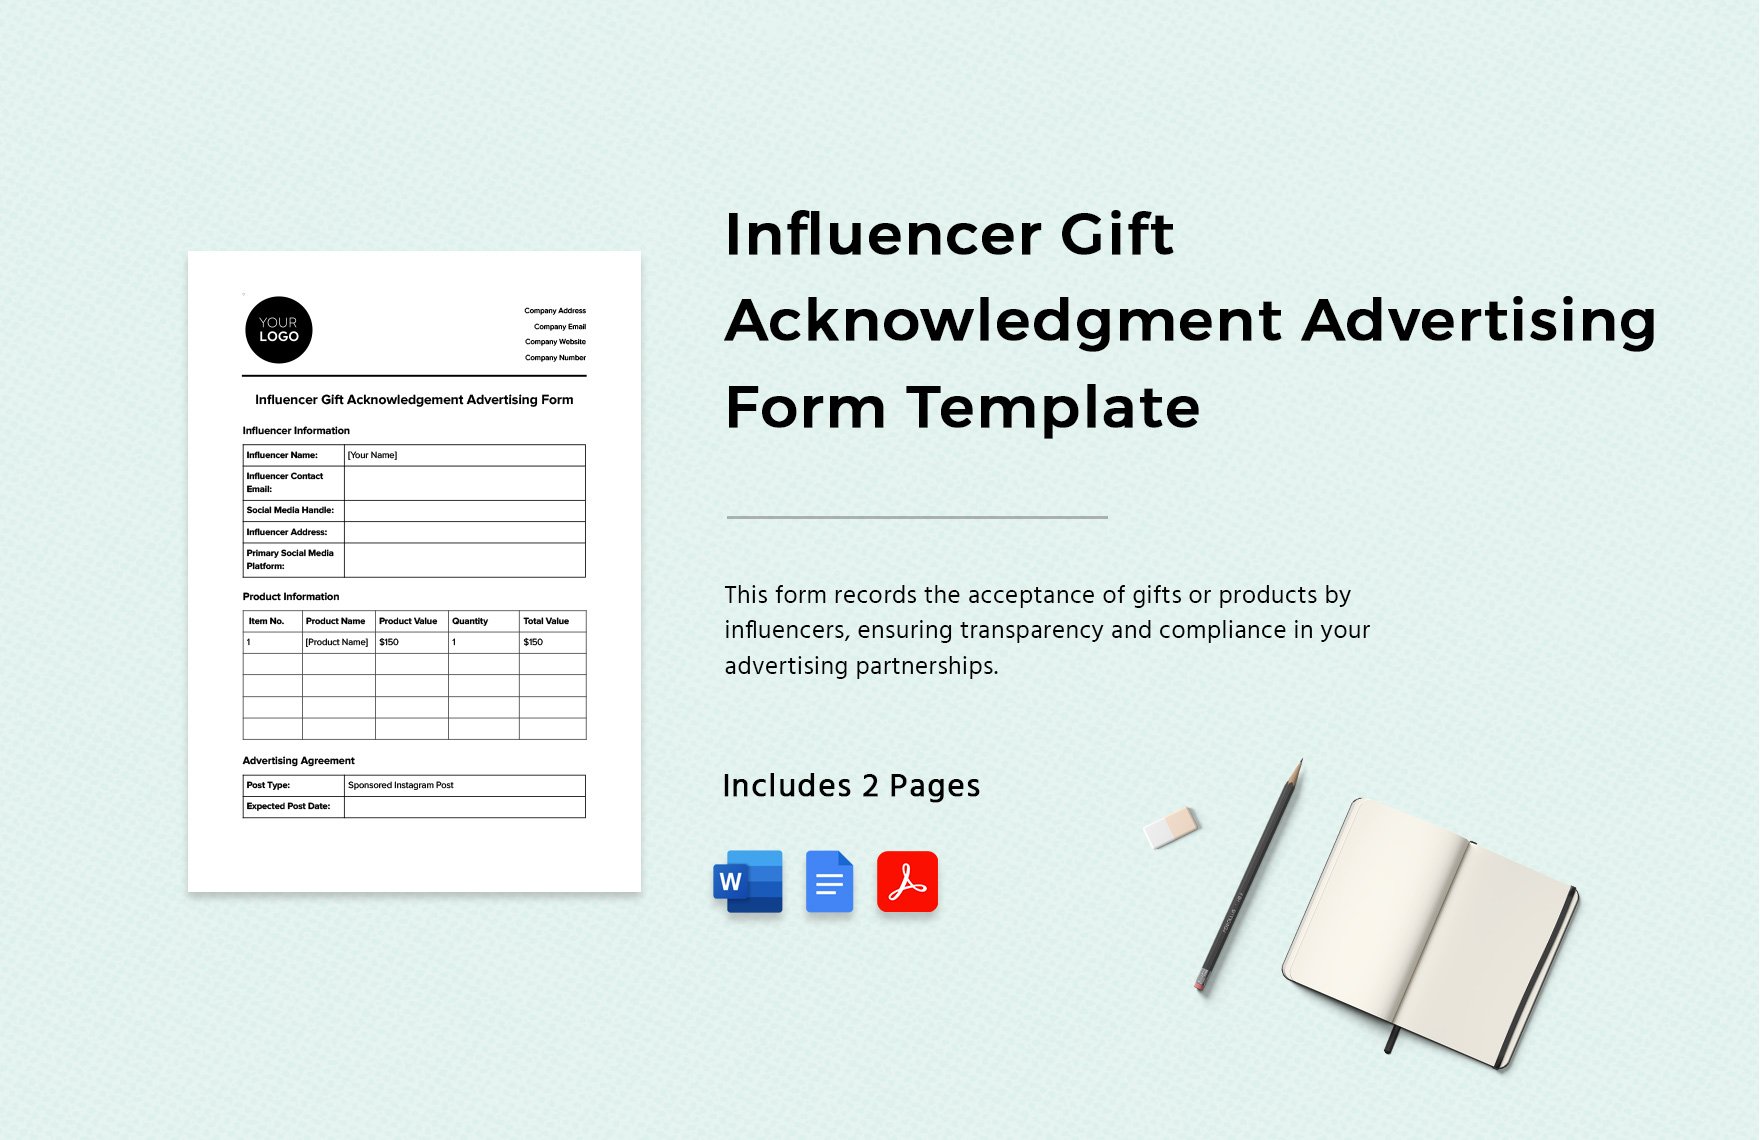 Influencer Gift Acknowledgment Advertising Form Template